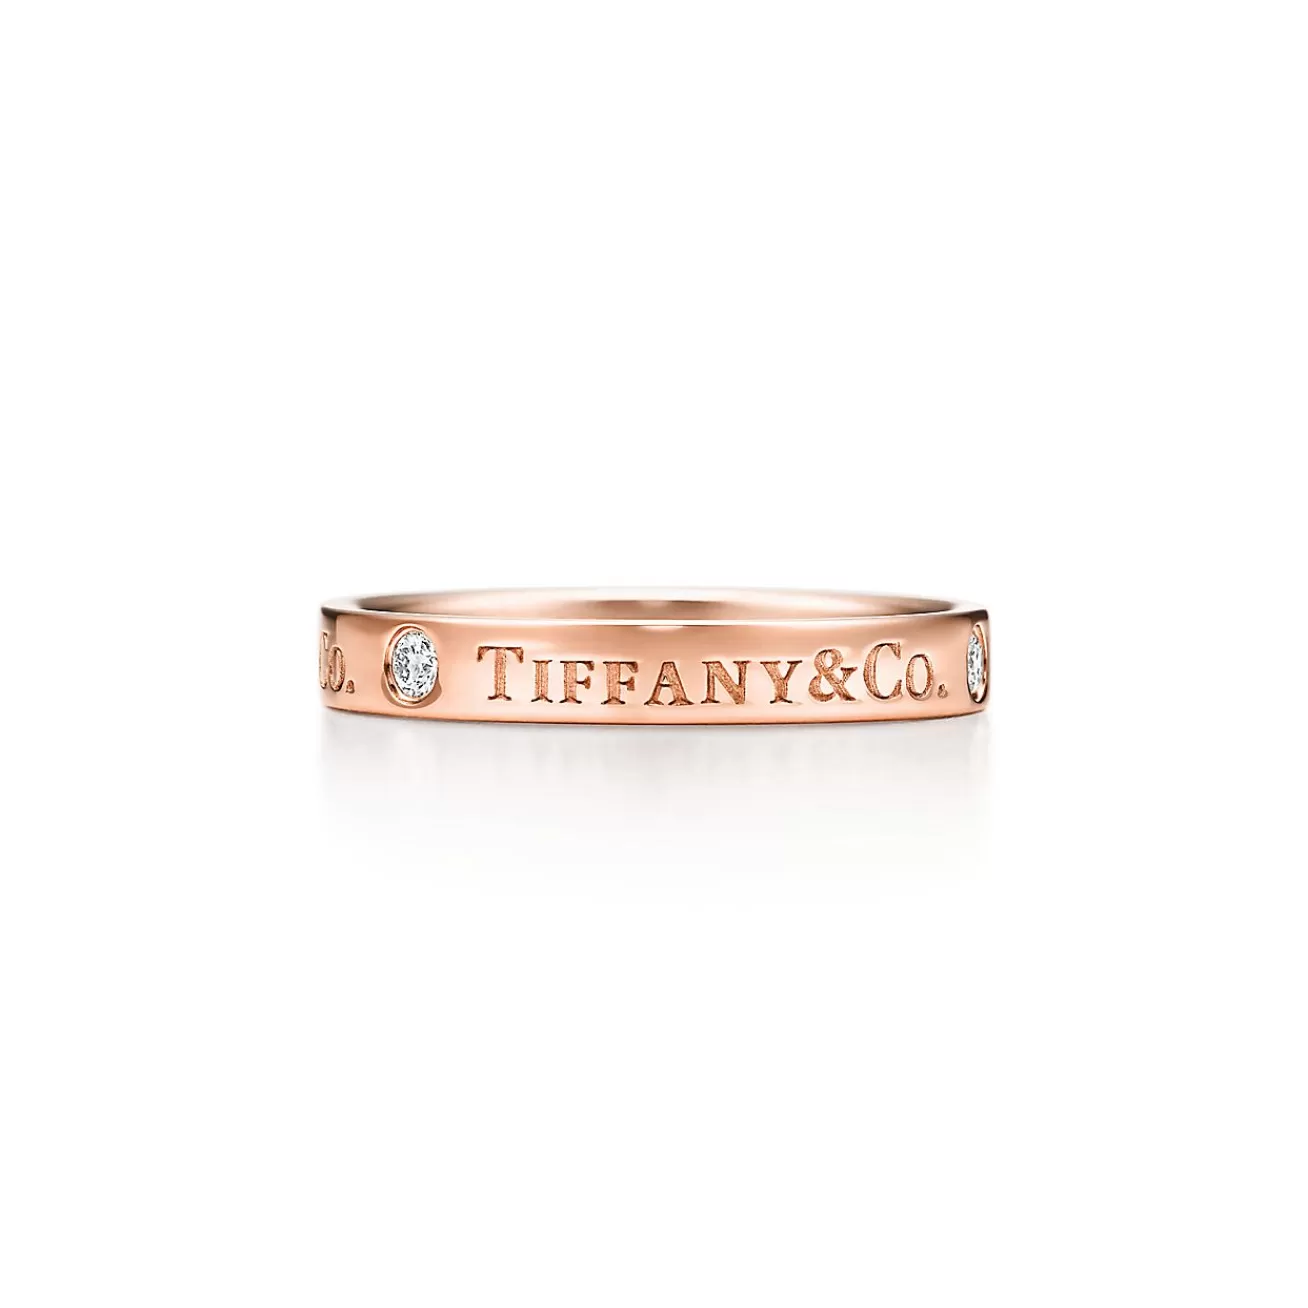 Tiffany & Co. T&CO.® band ring in 18k rose gold with diamonds, 3 mm wide. | ^Women Rings | Rose Gold Jewelry